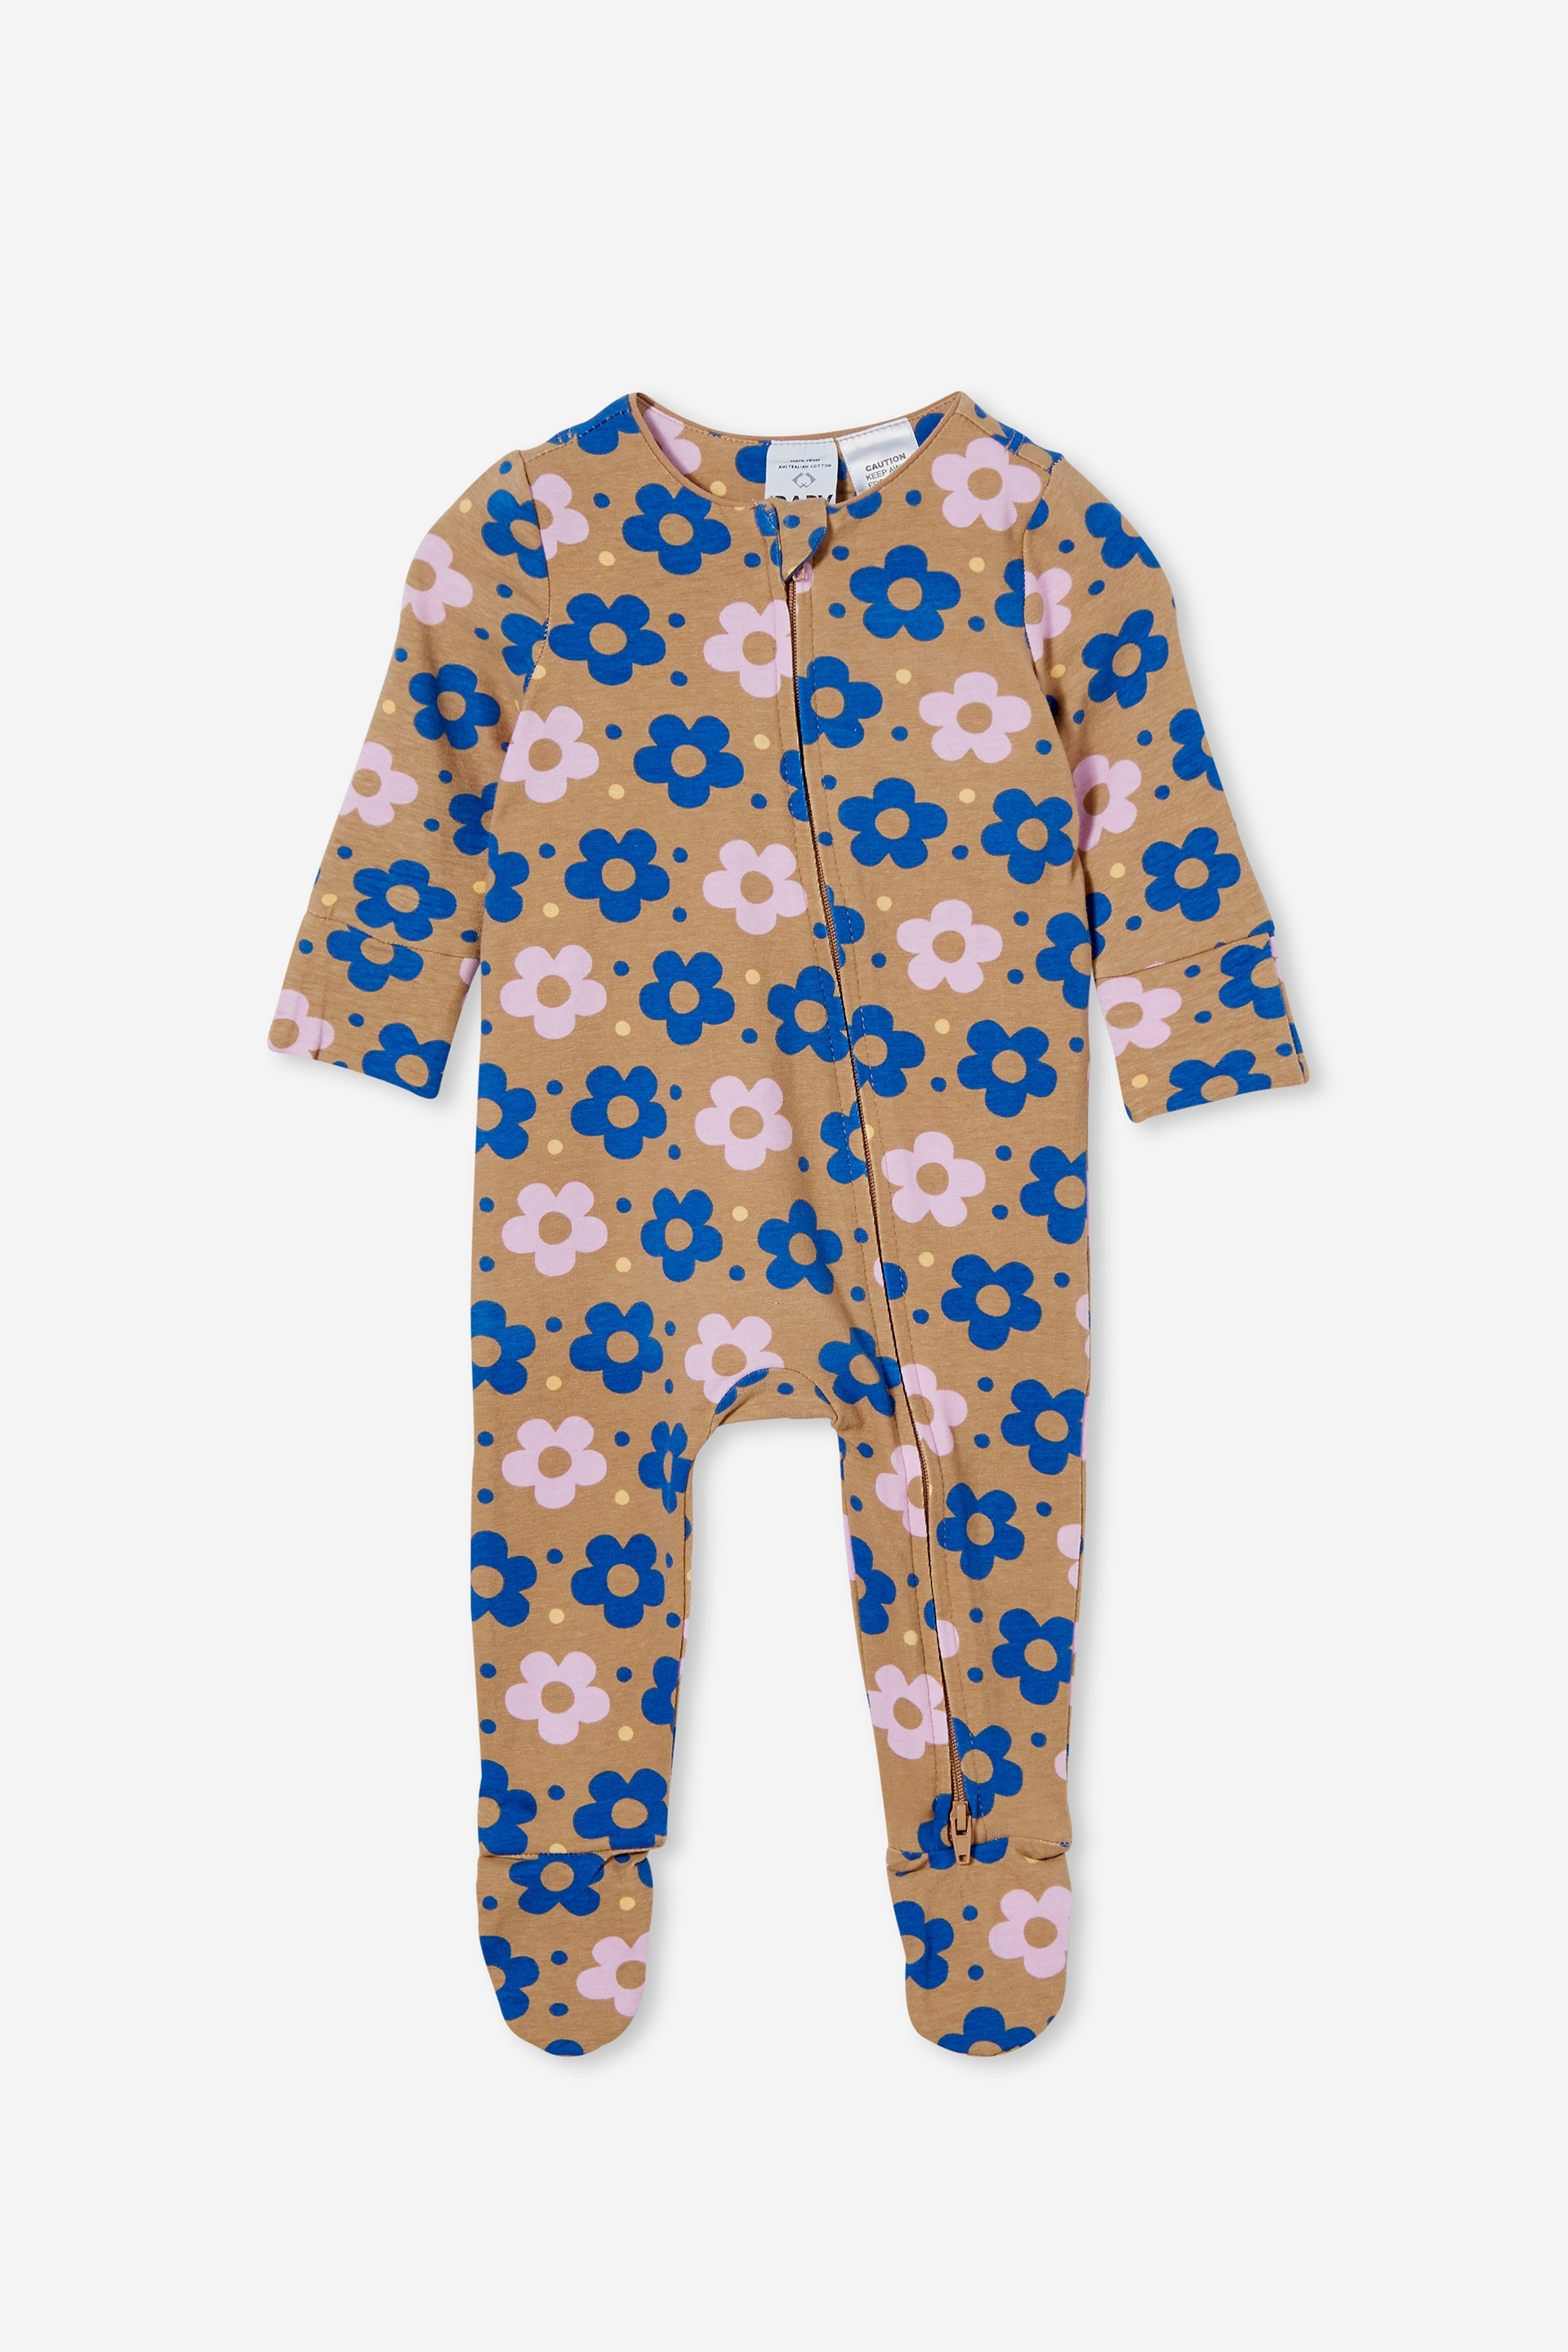 Cotton On Kids - The Long Sleeve Zip Romper - Taupy brown/daisy spot